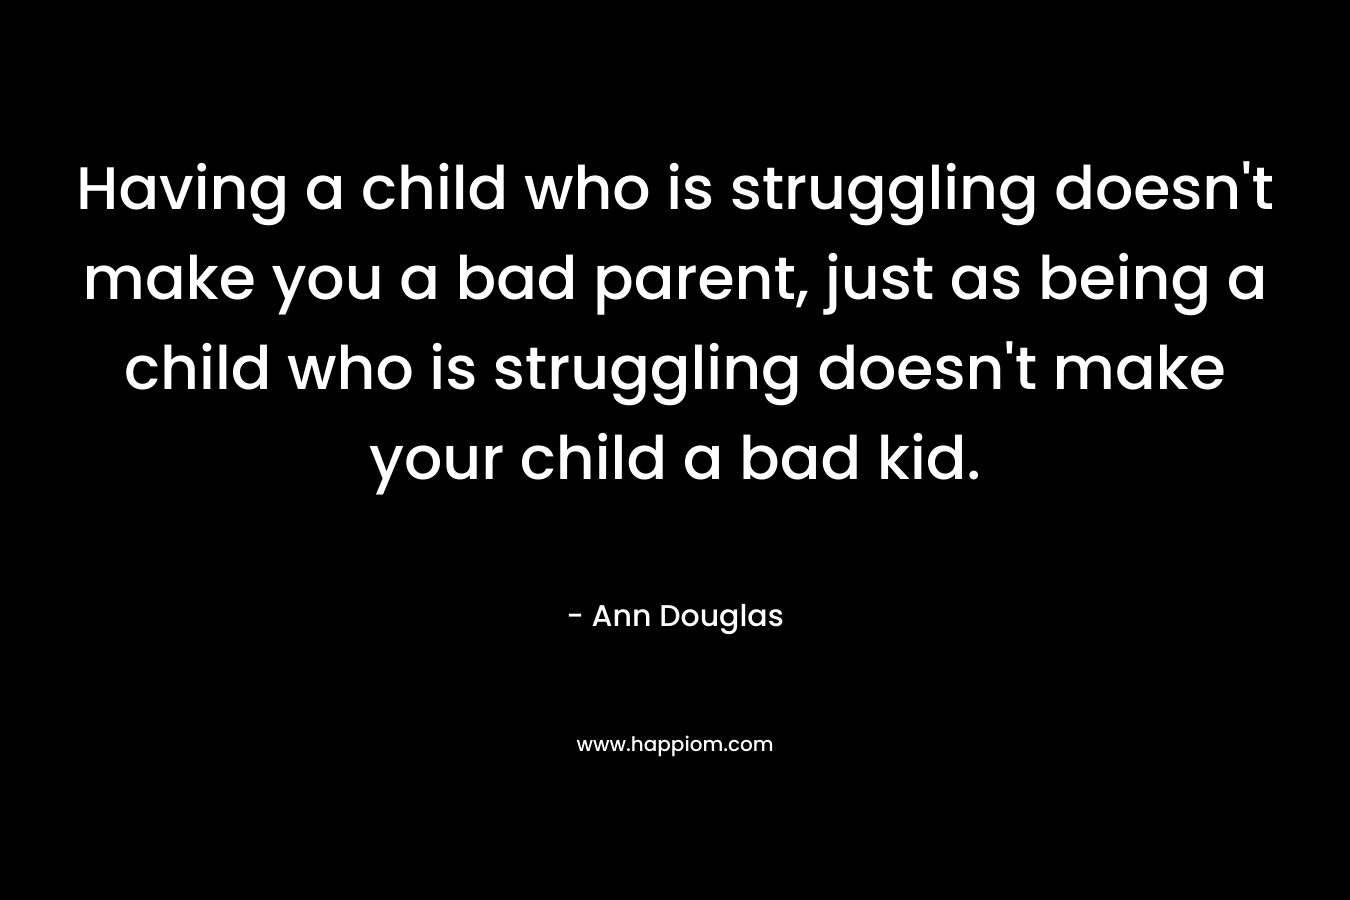 Having a child who is struggling doesn’t make you a bad parent, just as being a child who is struggling doesn’t make your child a bad kid. – Ann Douglas